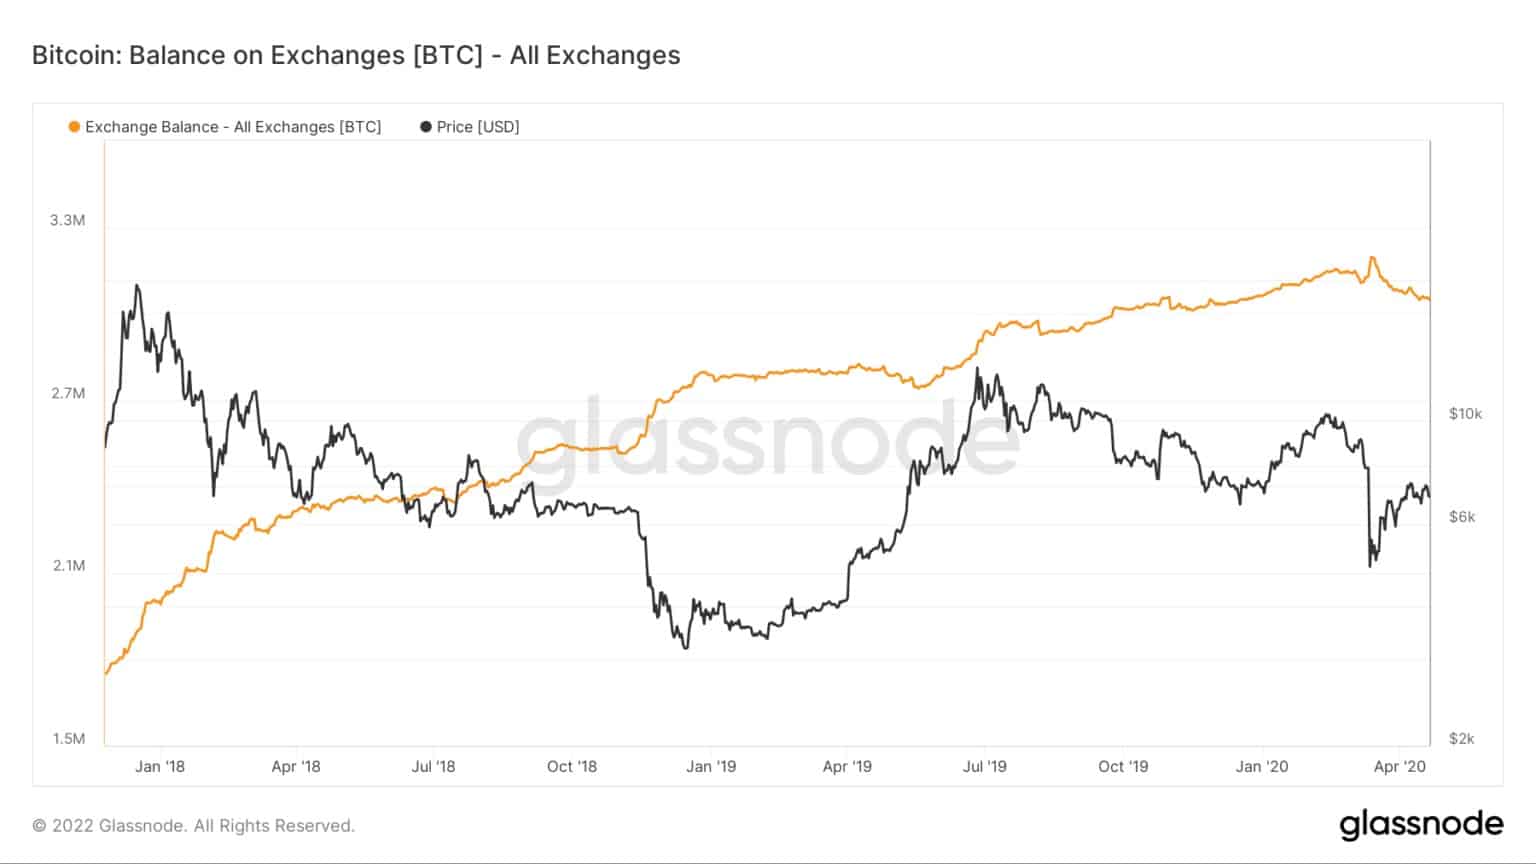 Bitcoin: Balance on Exchanges - All Exchanges (Source: Glassnode)